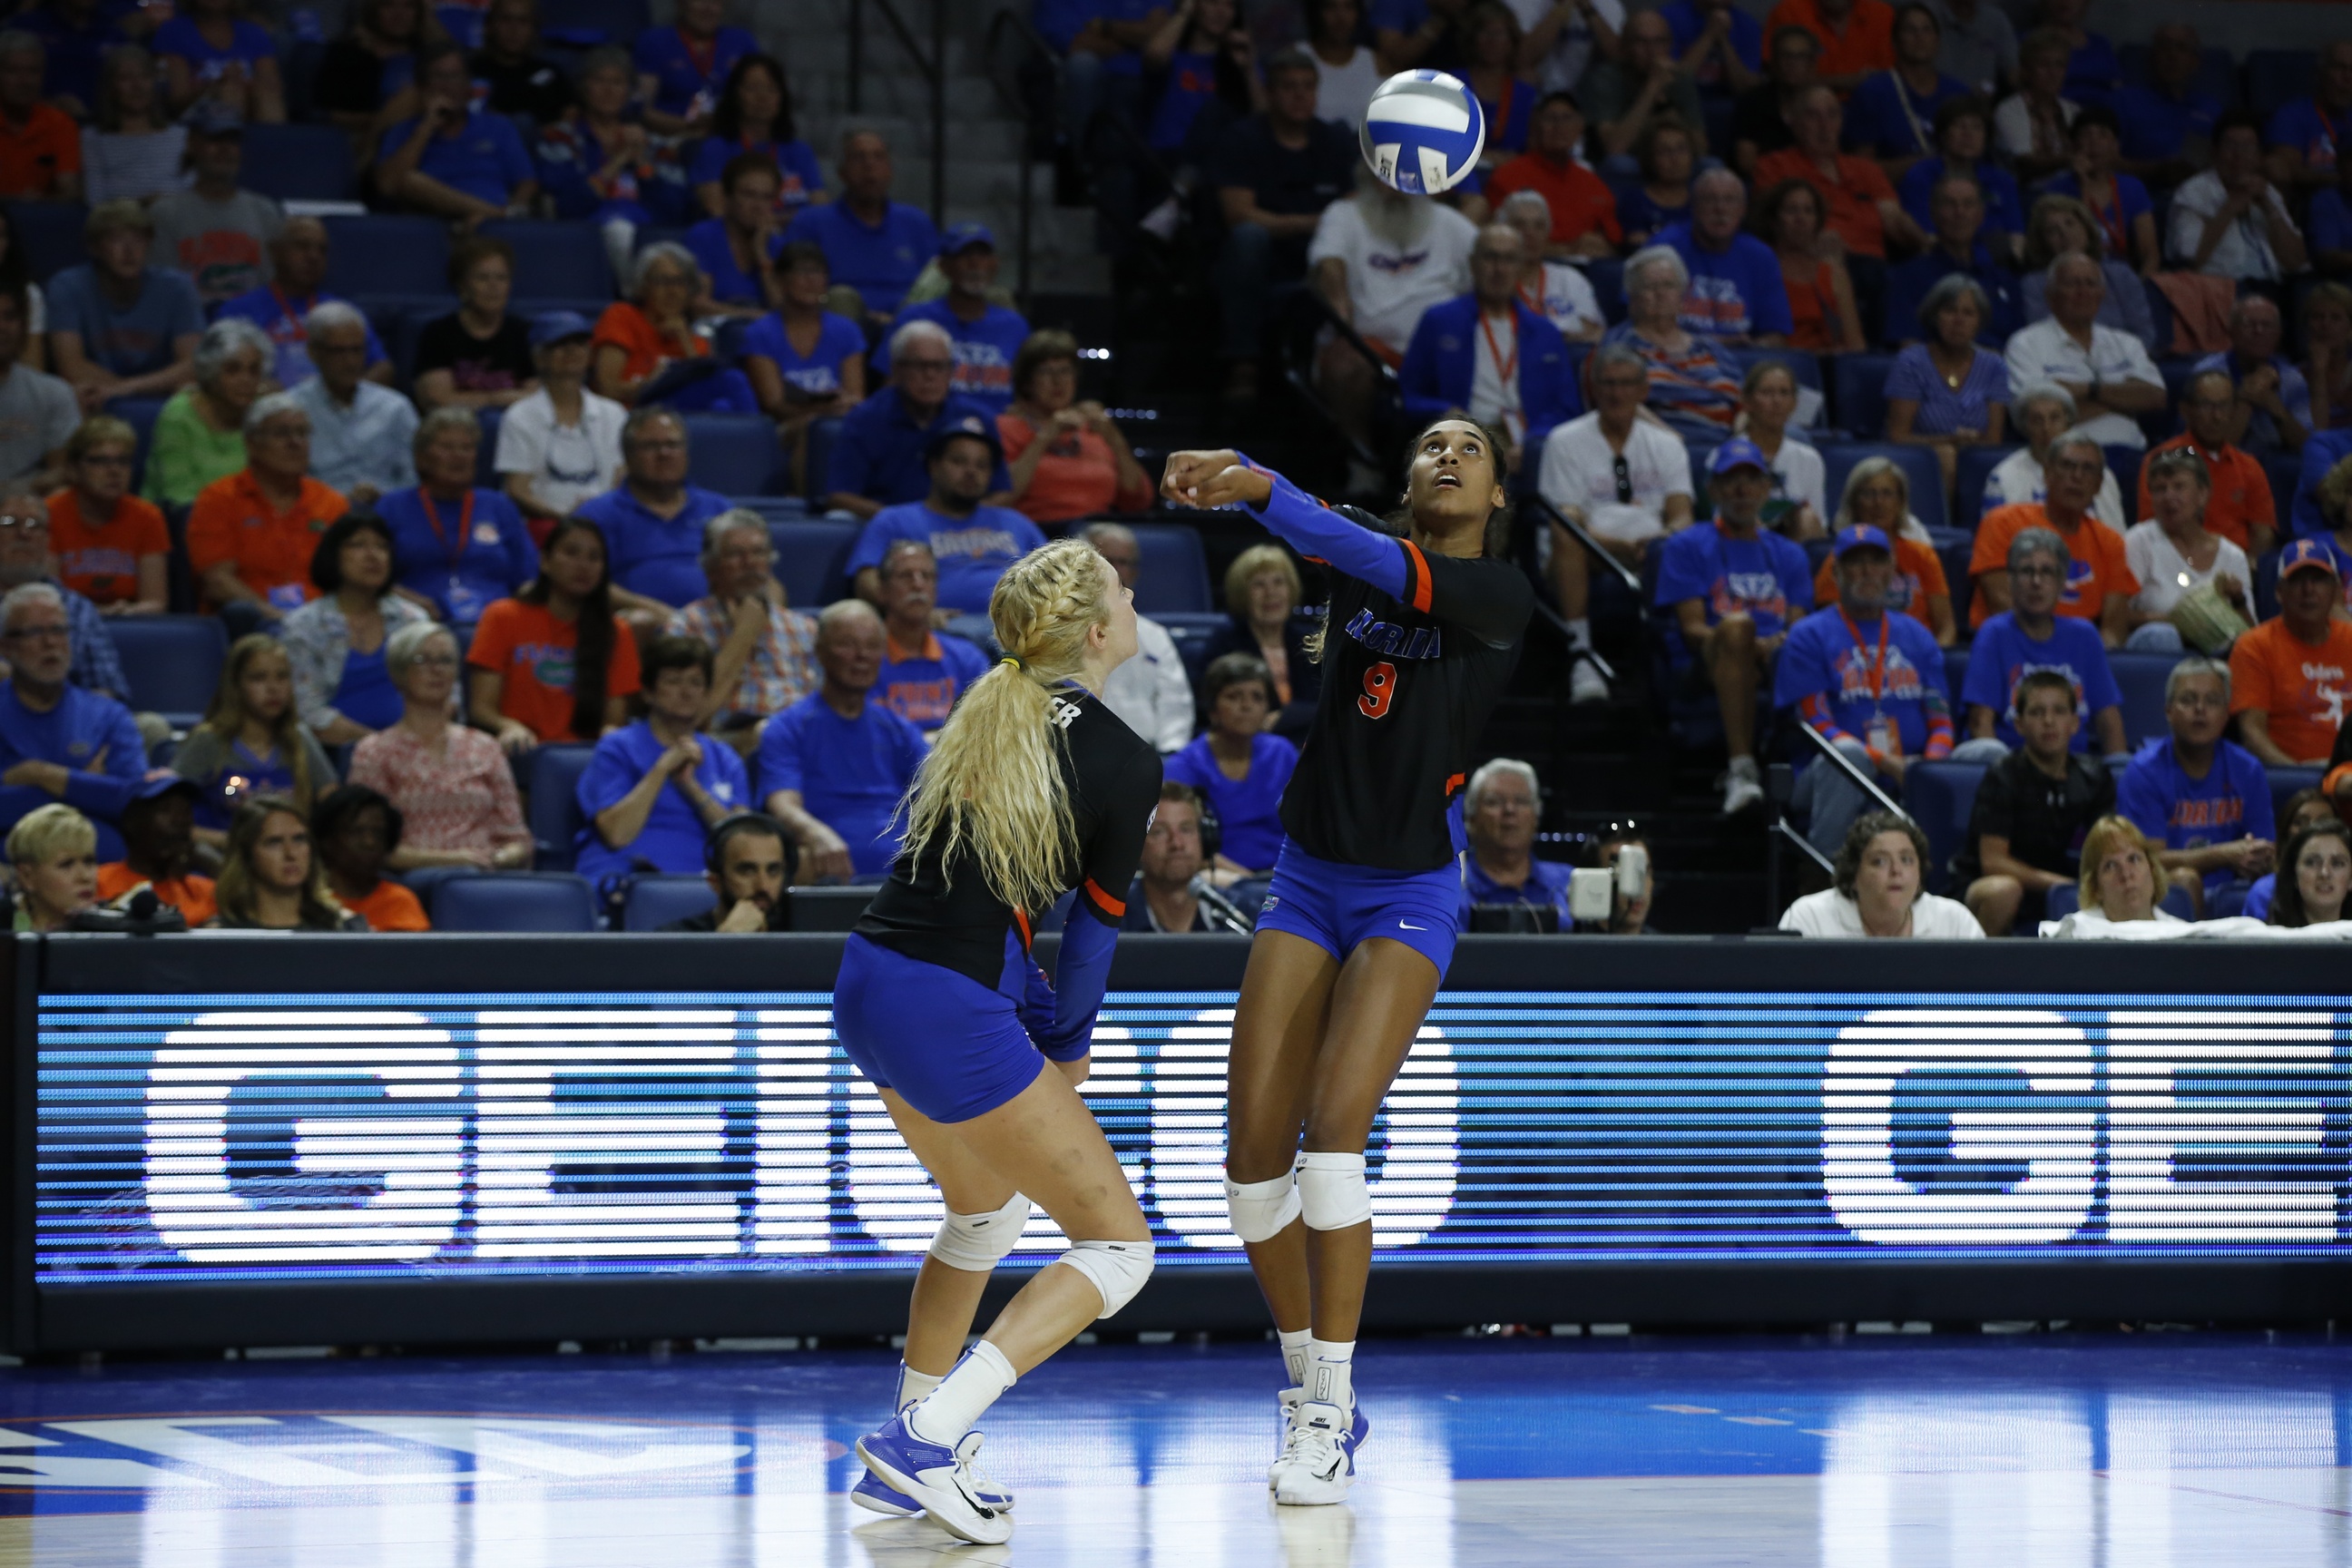 Gator Volleyball Looks to Stay Hot Against Aggies ESPN 98.1 FM 850